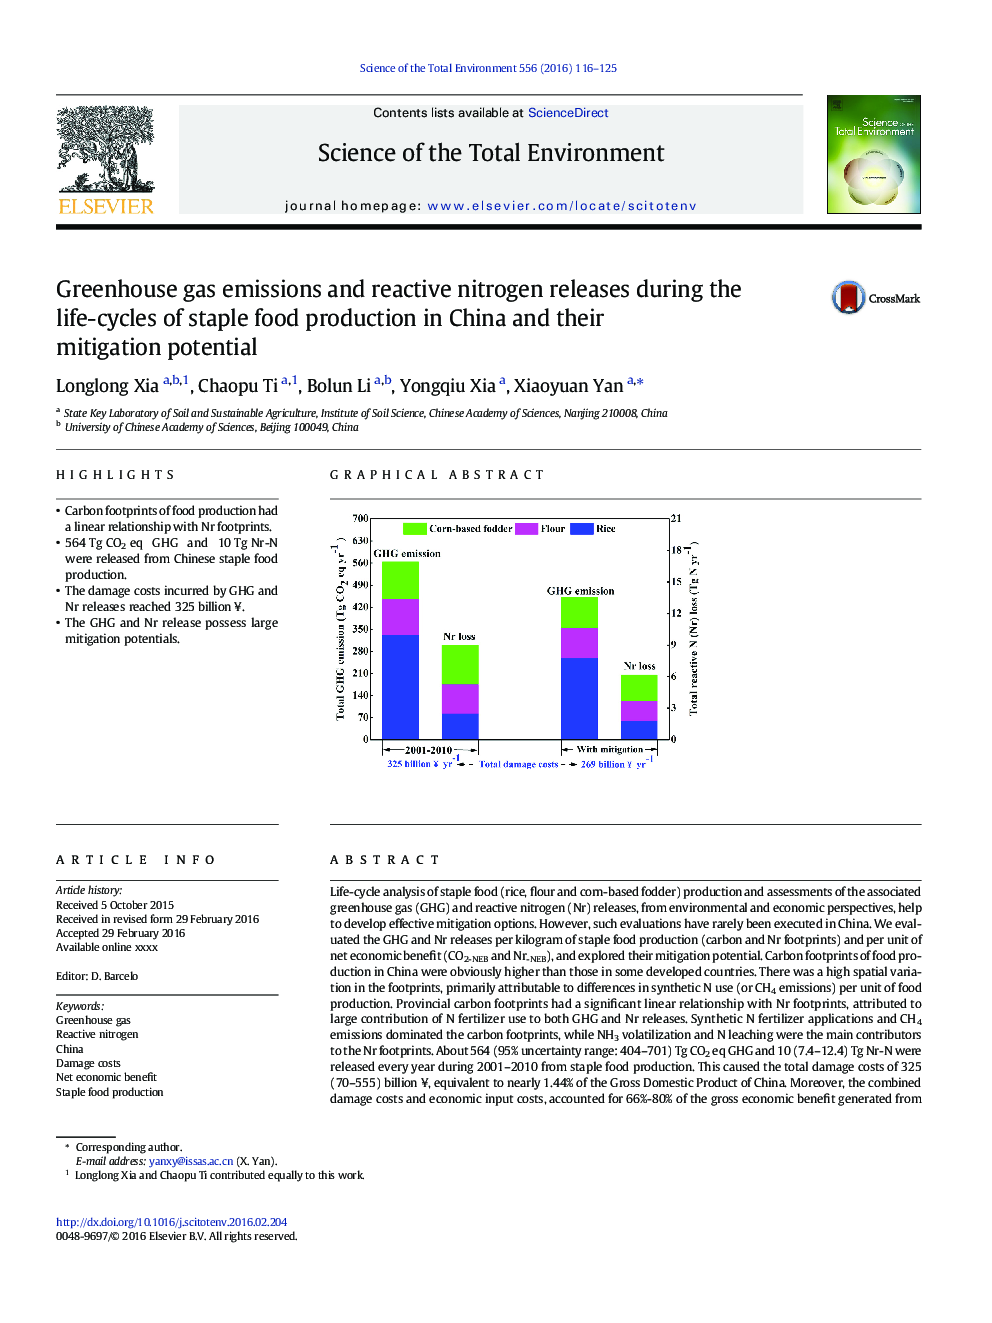 Greenhouse gas emissions and reactive nitrogen releases during the life-cycles of staple food production in China and their mitigation potential